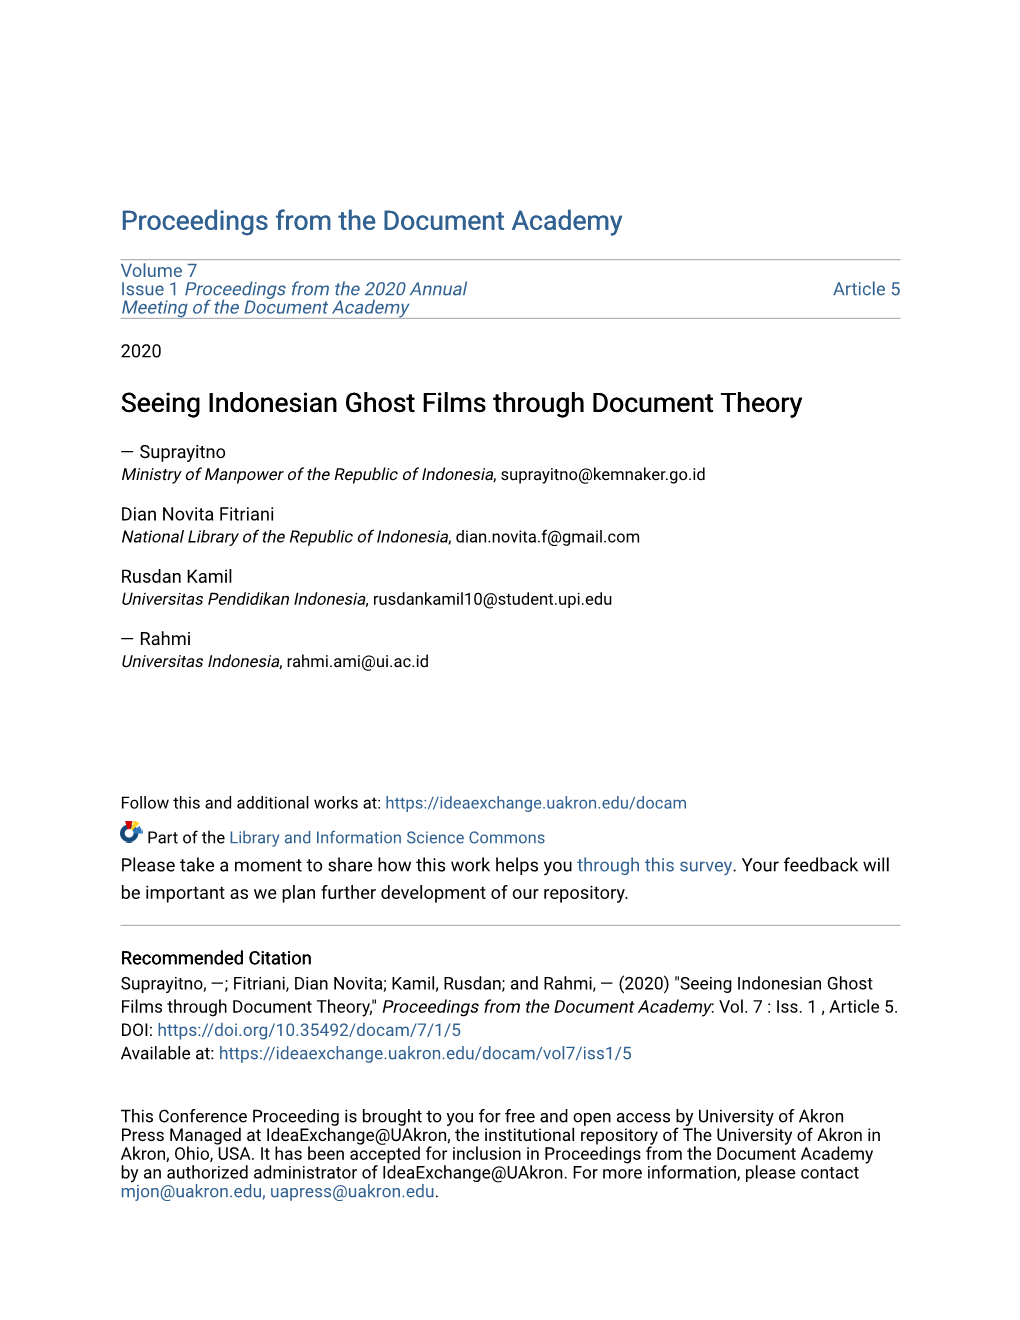 Seeing Indonesian Ghost Films Through Document Theory